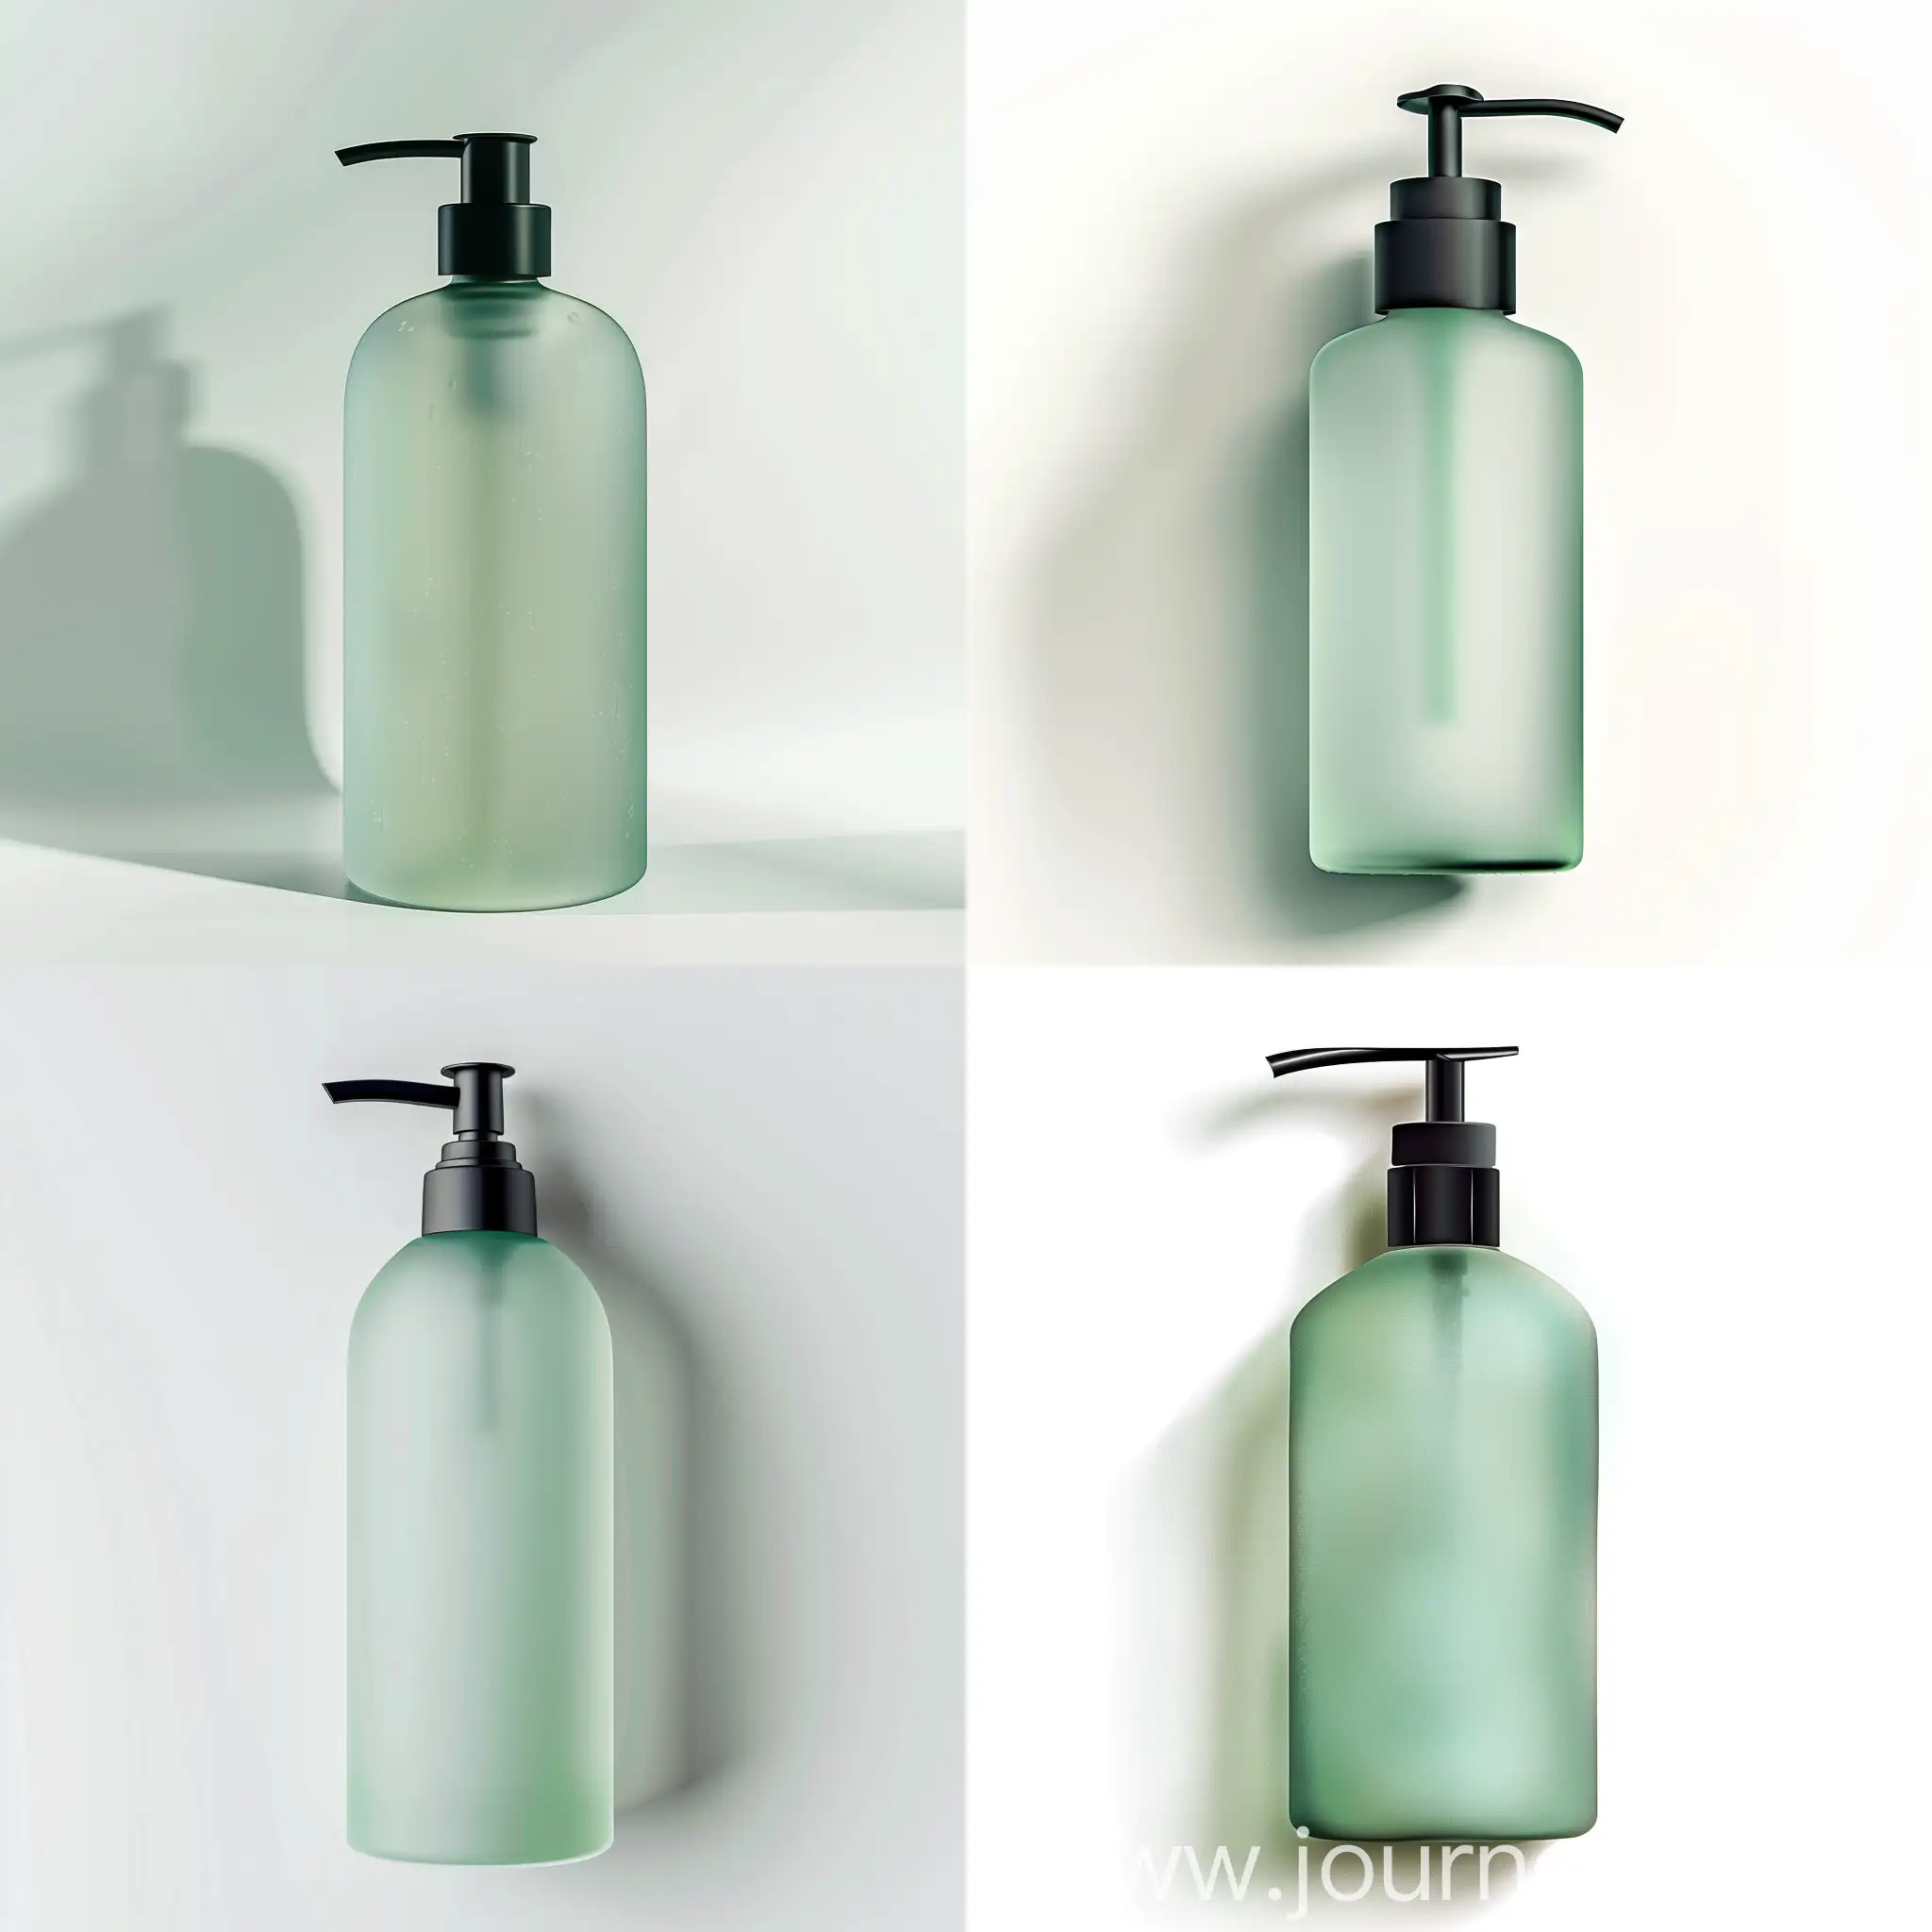 Minimalist-Frosted-Glass-Shampoo-Bottle-with-Black-Pump-on-White-Background